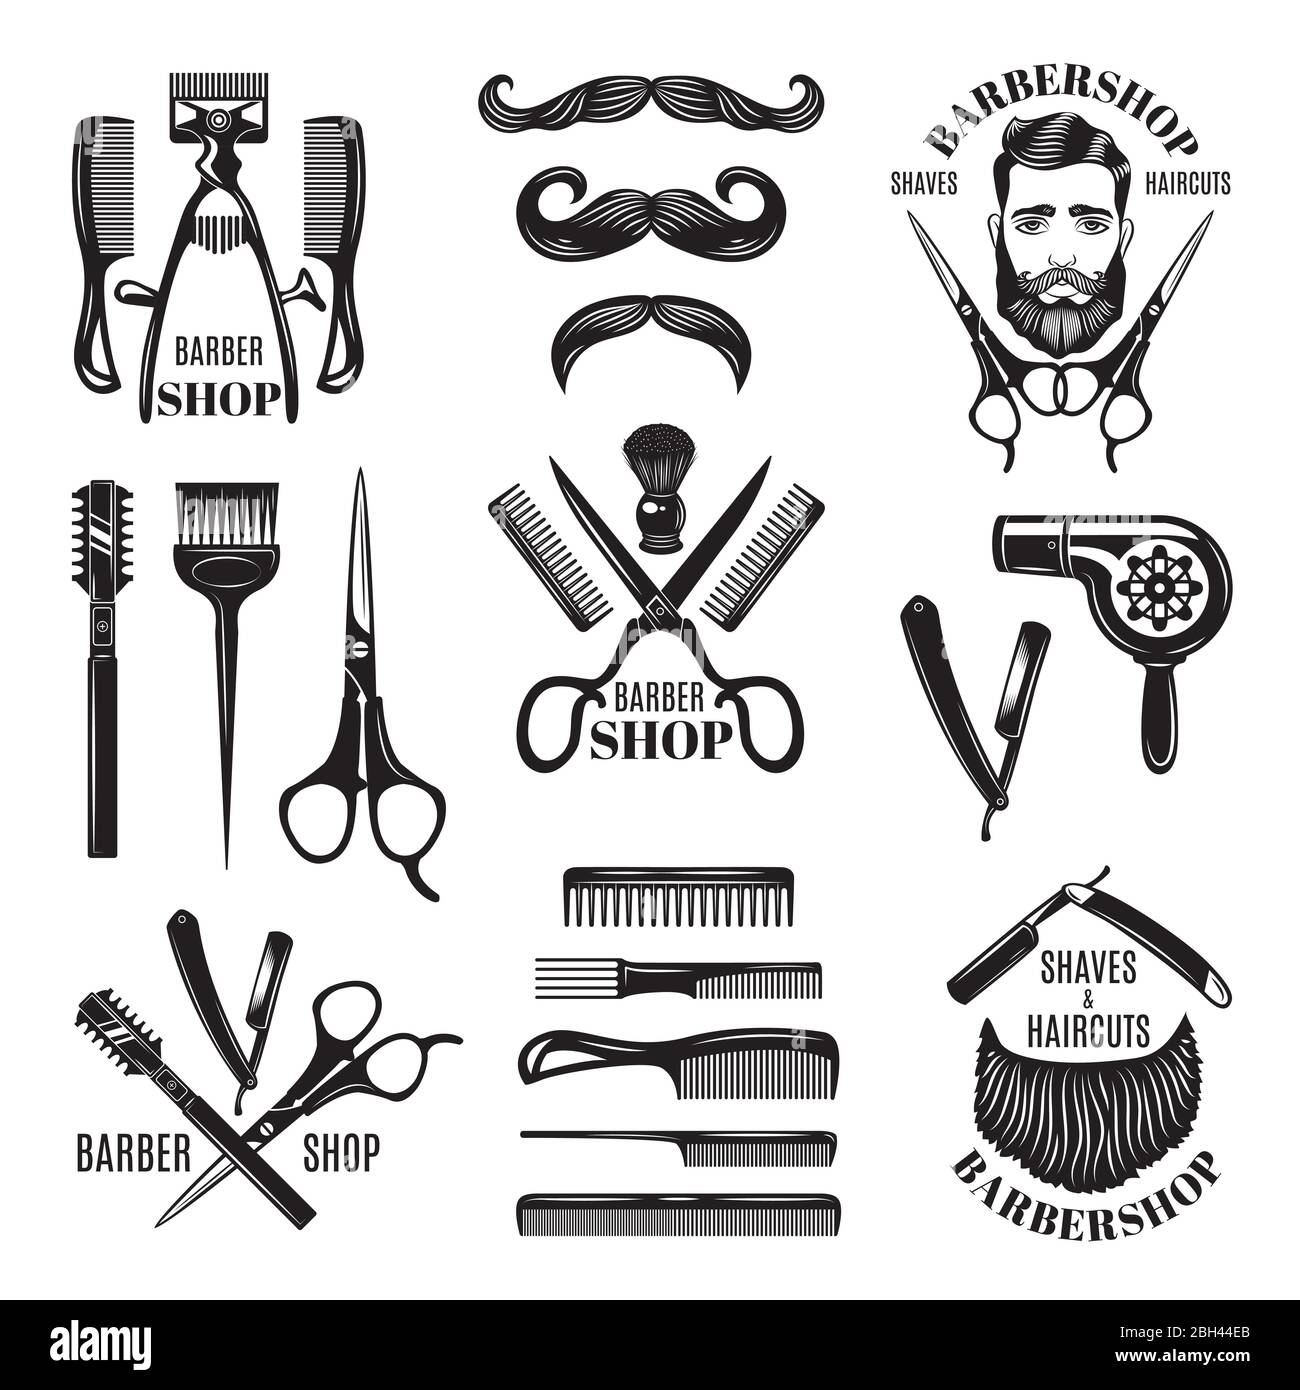 Barber shop tools Cut Out Stock Images & Pictures - Alamy